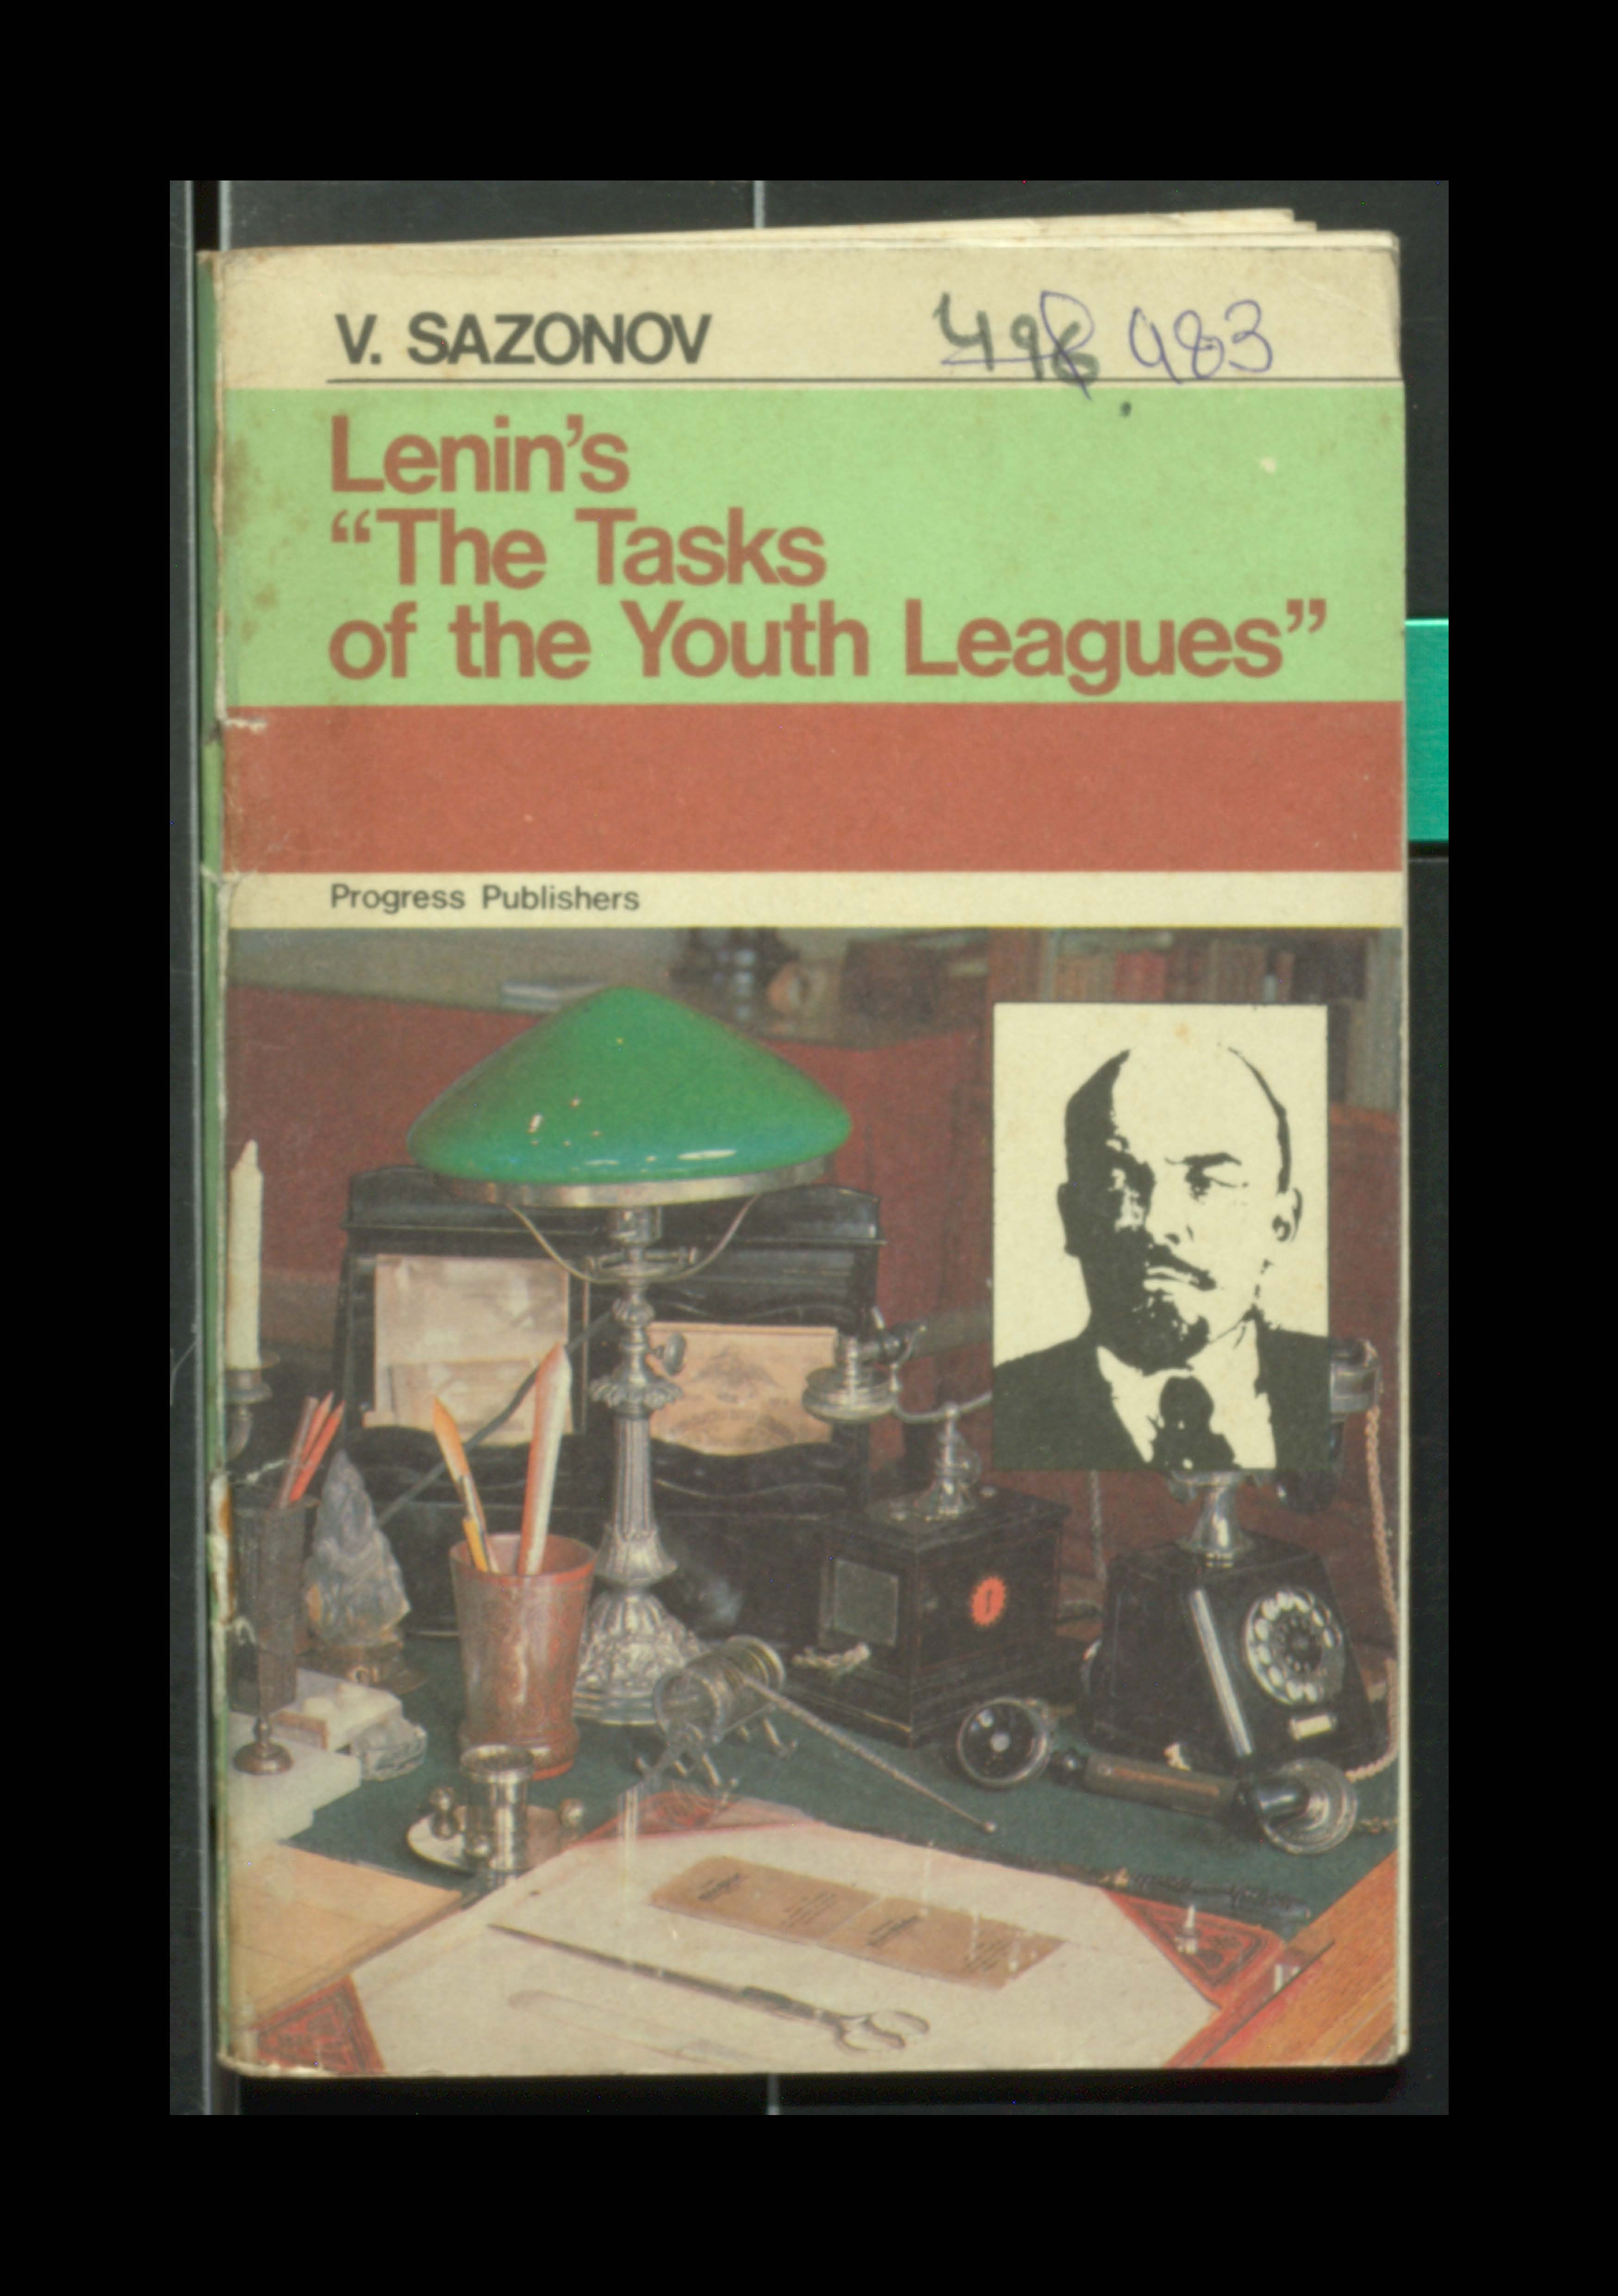 LENIN'S "the tasks of the youth leagues"